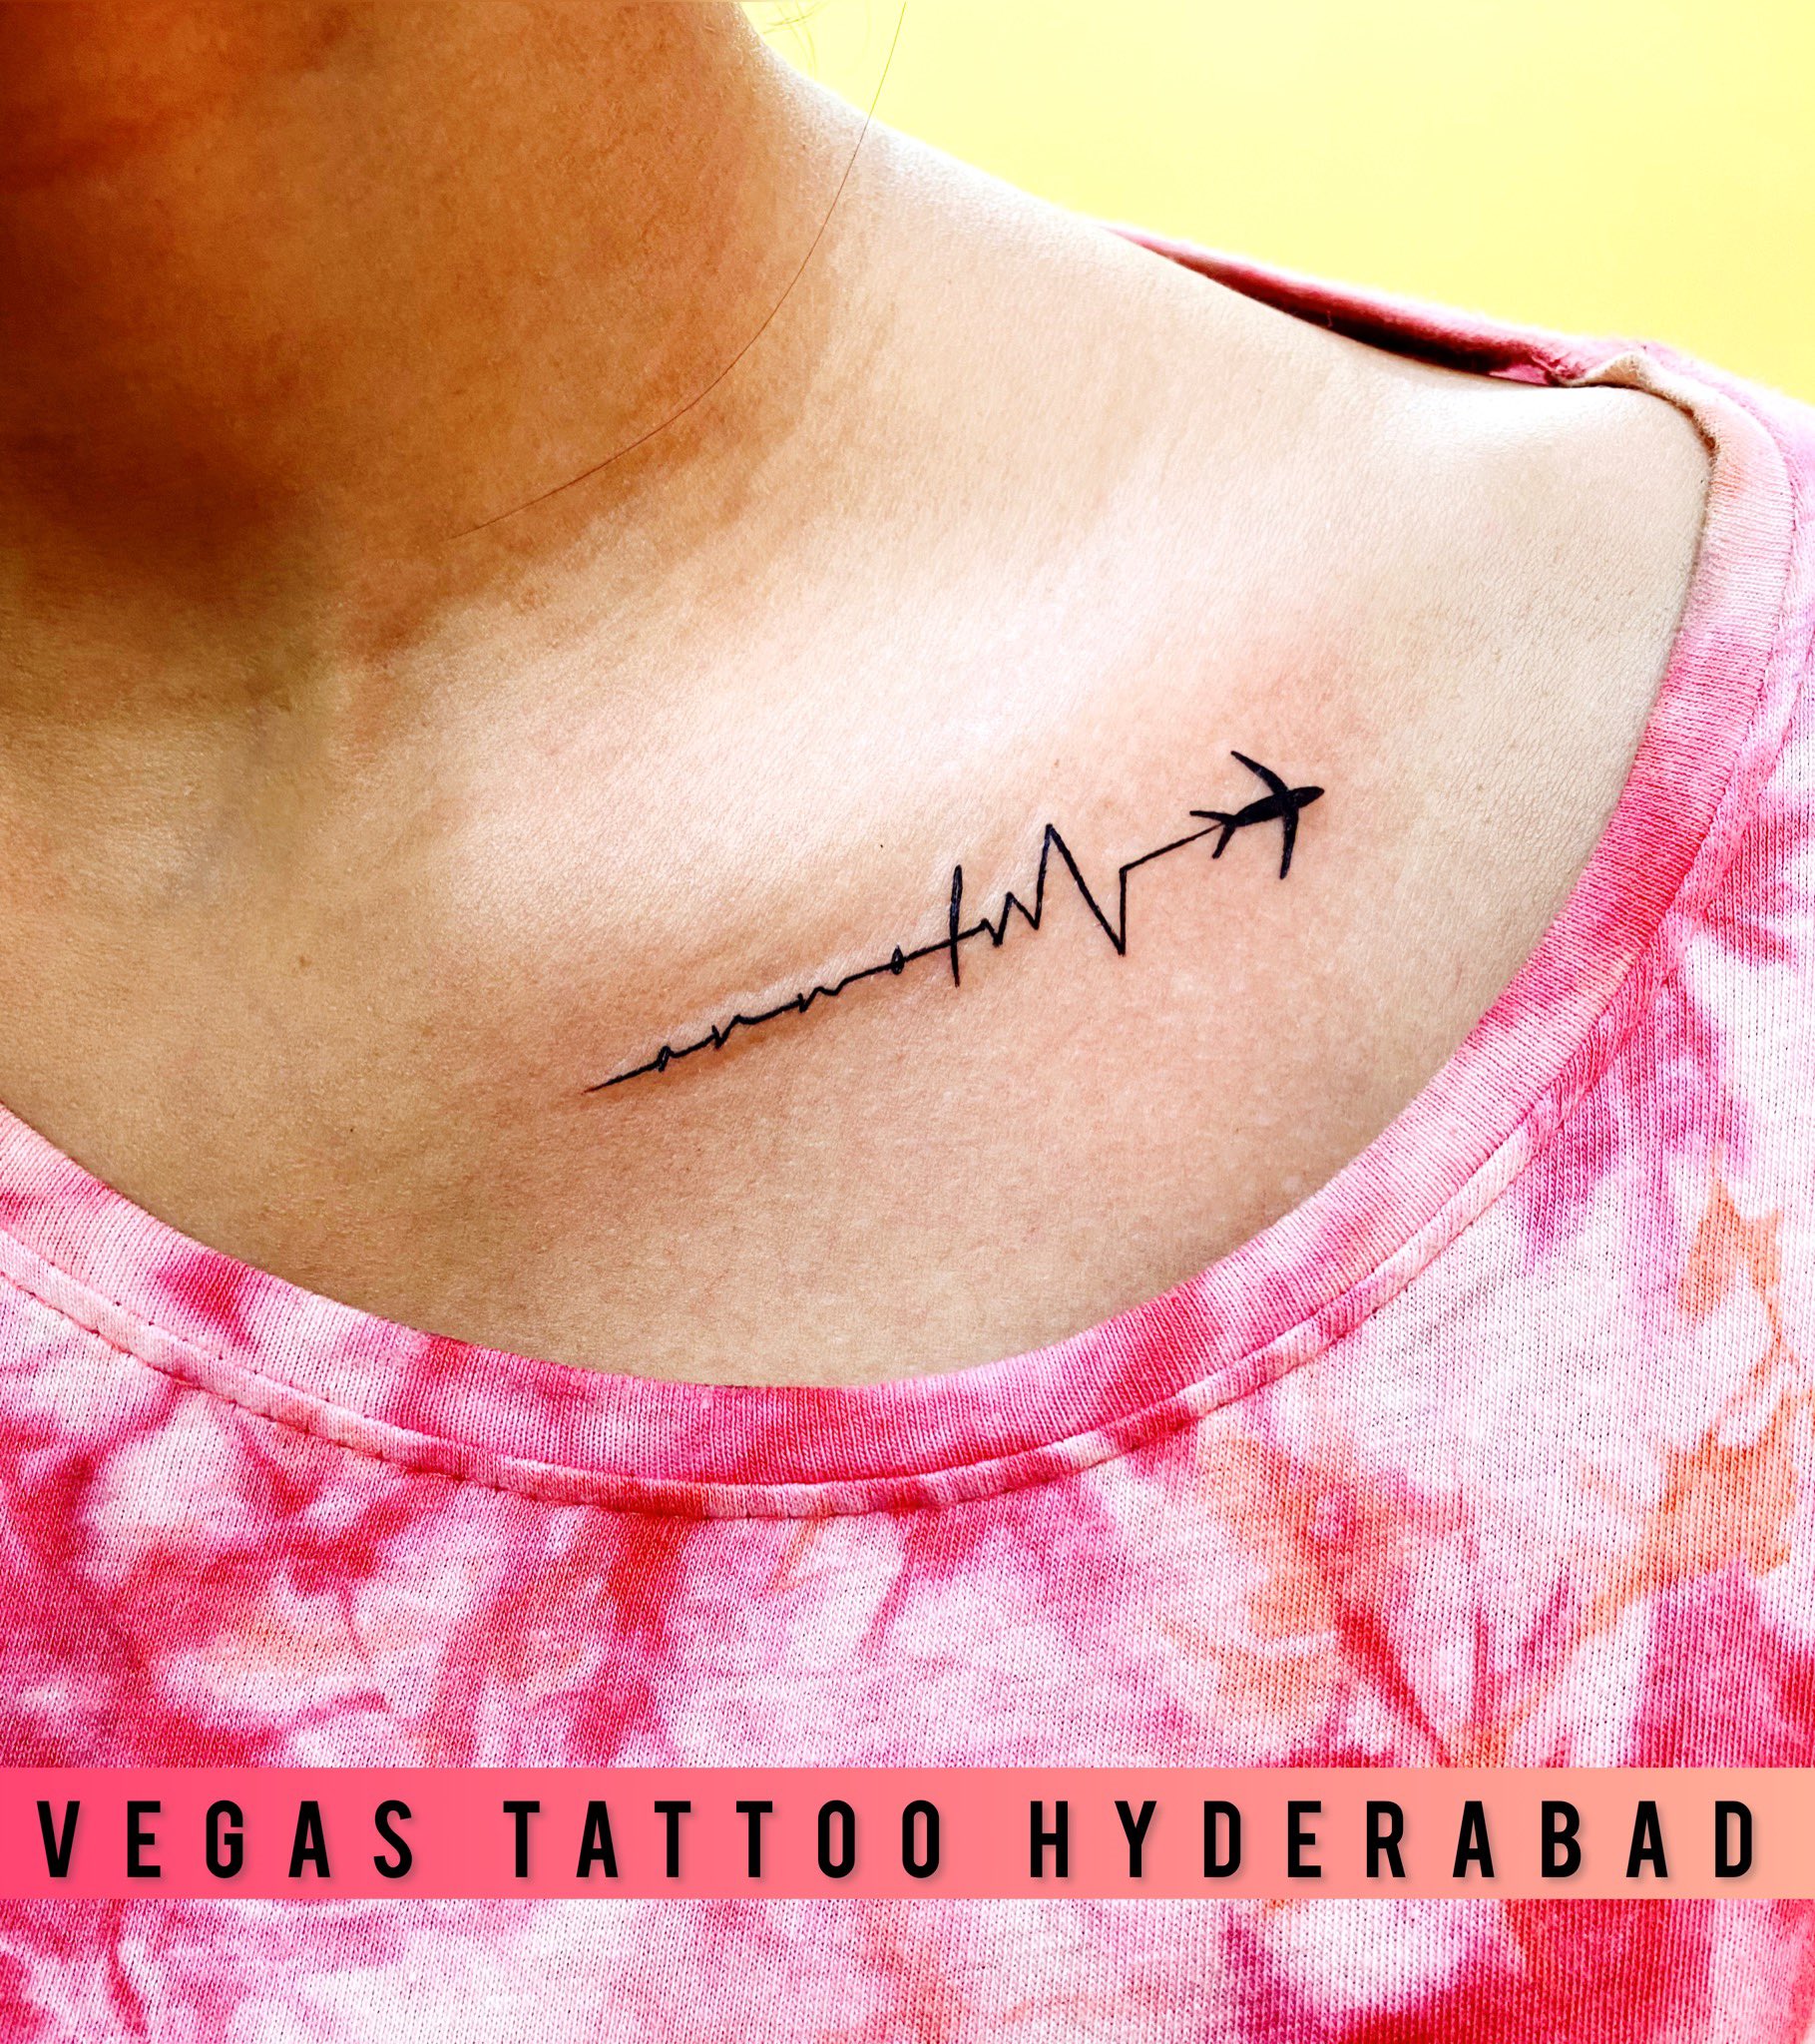 Buy Heartbeat Tattoos Online In India - Etsy India